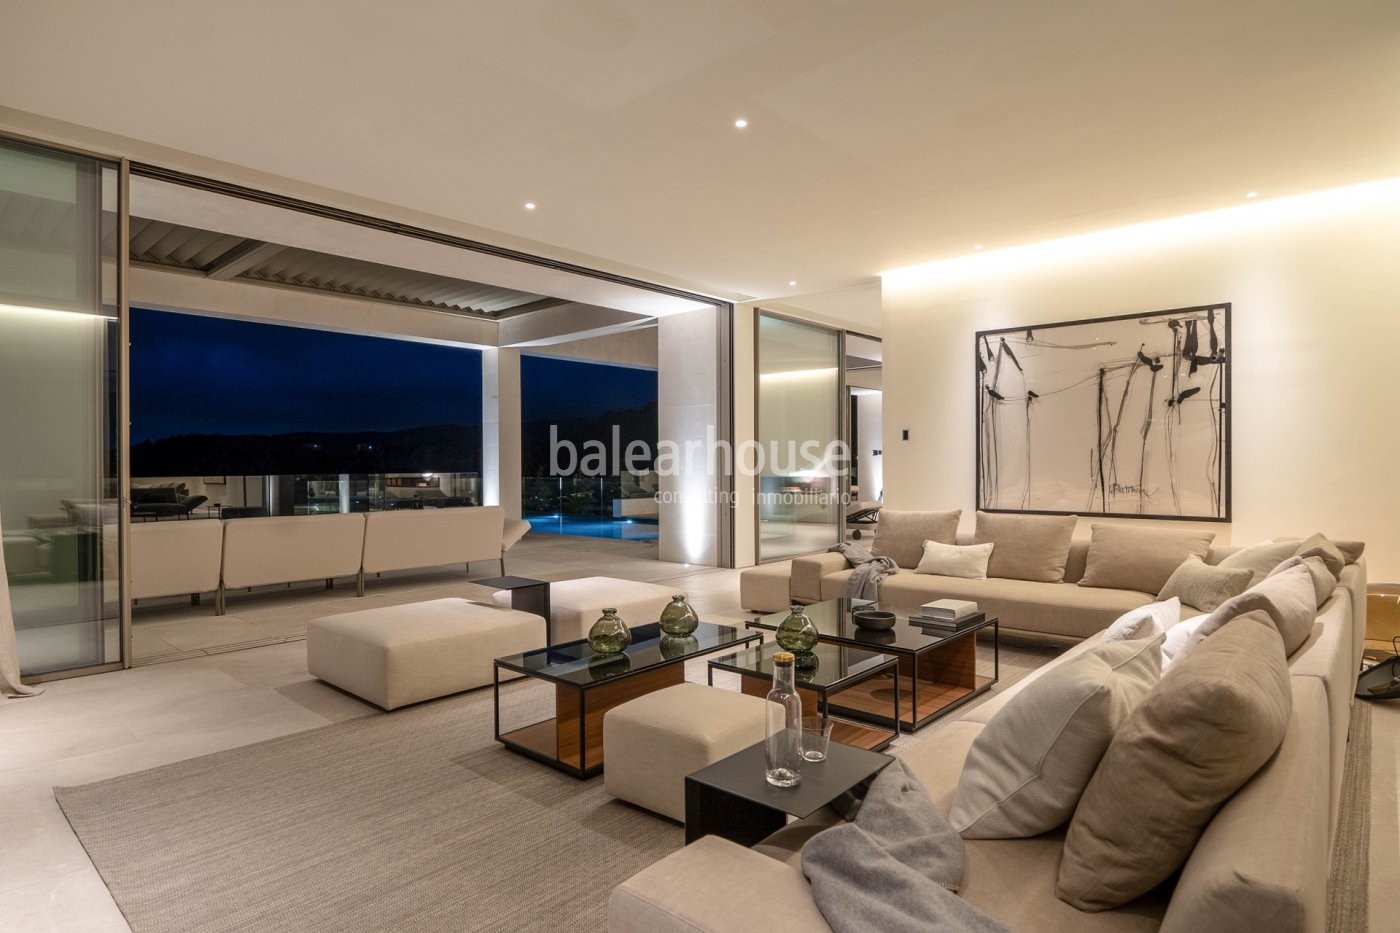 Avant-garde and design with stunning sea views in this newly built villa in Son Vida.